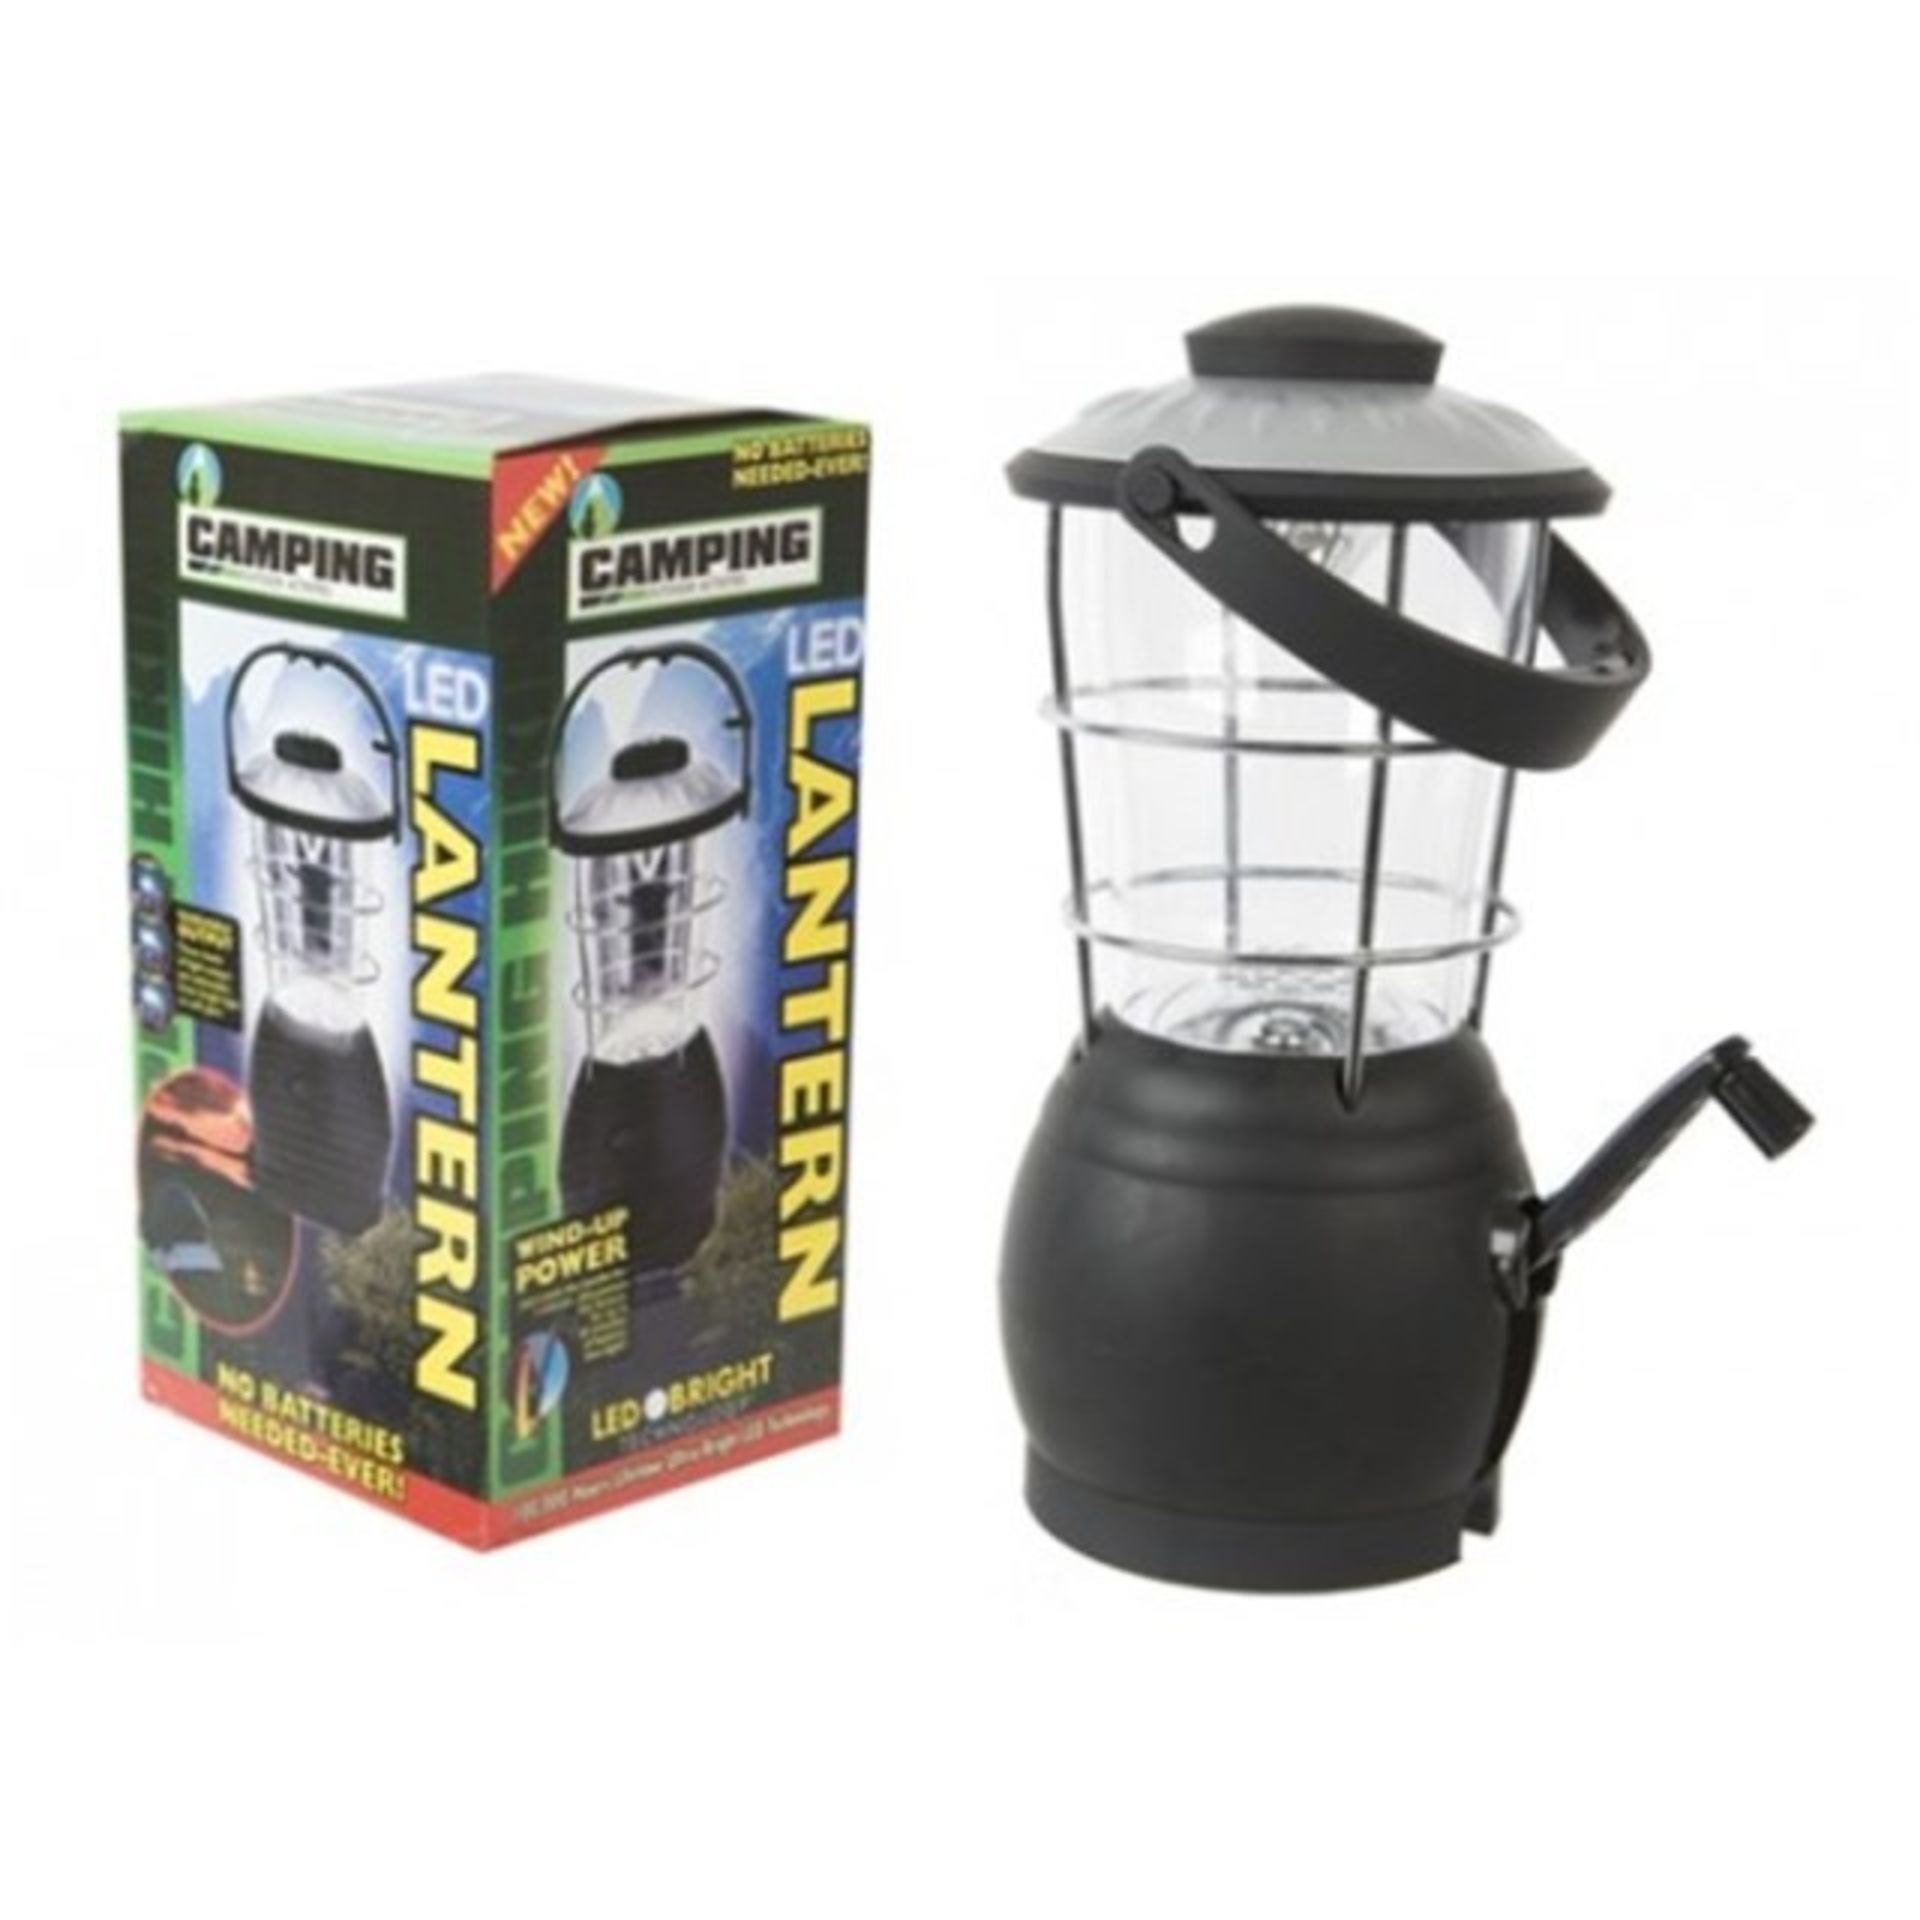 V Brand New 12 LED Wind Up Camping Lantern In Box RRP24.99